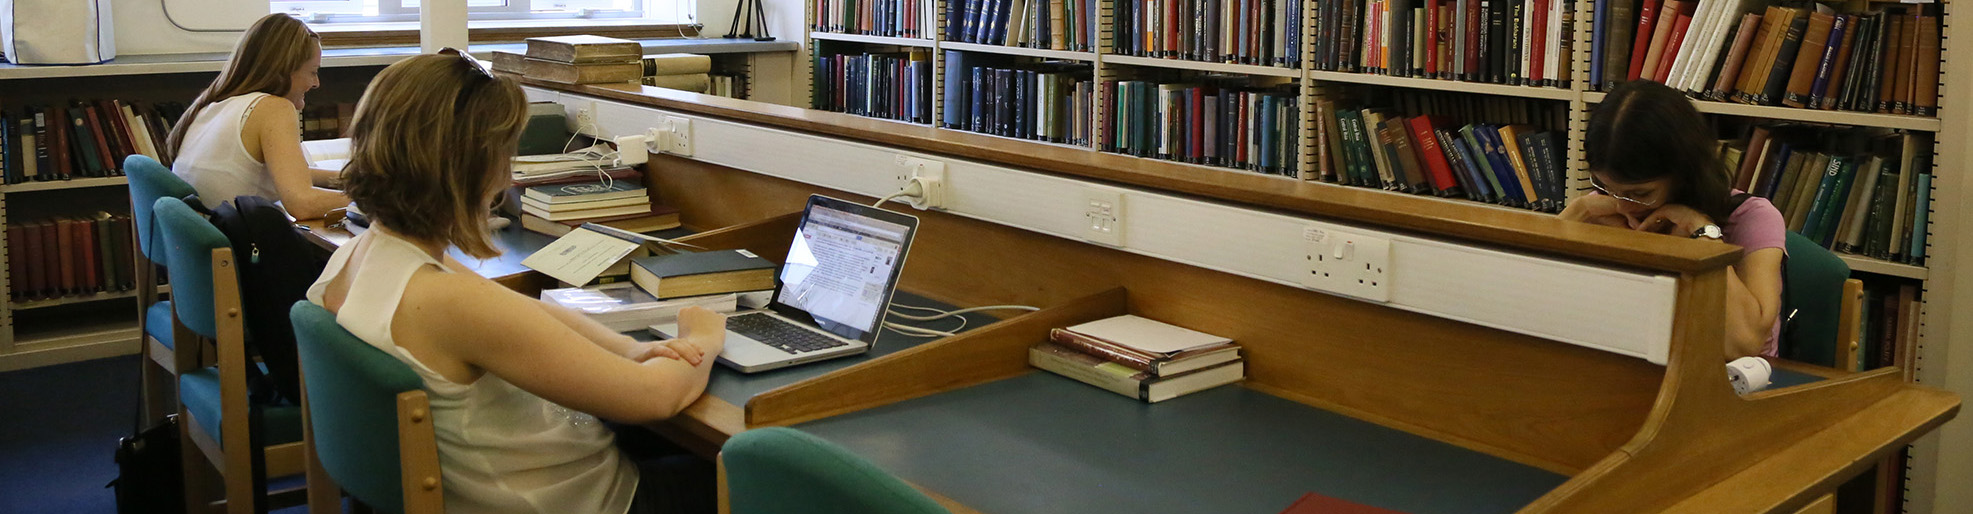 Two students sit next to each other at a three-seater library desk